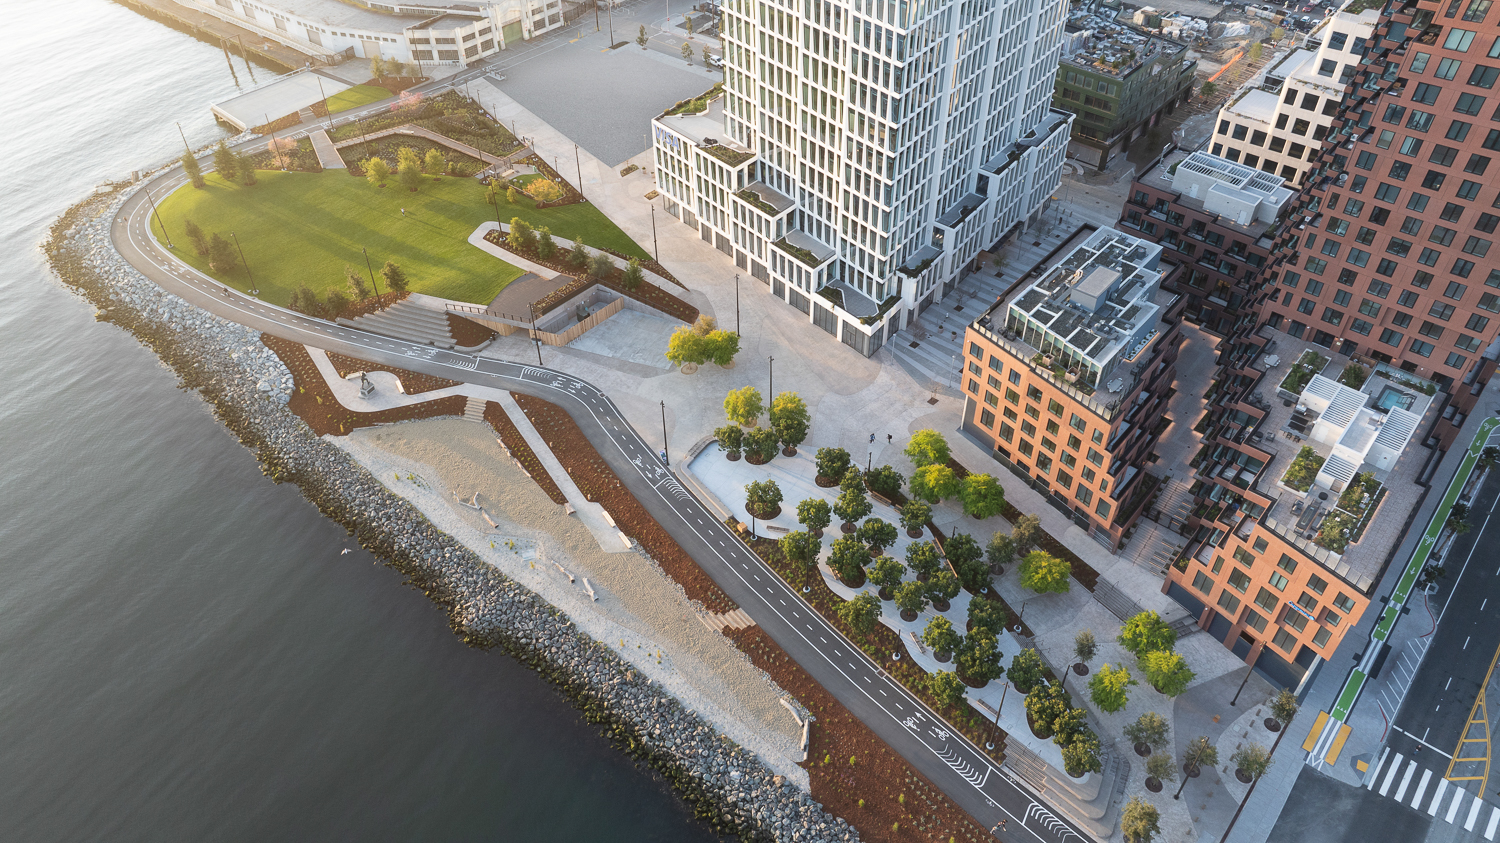 China Basin Park aerial overview, image by Jason O'Rear